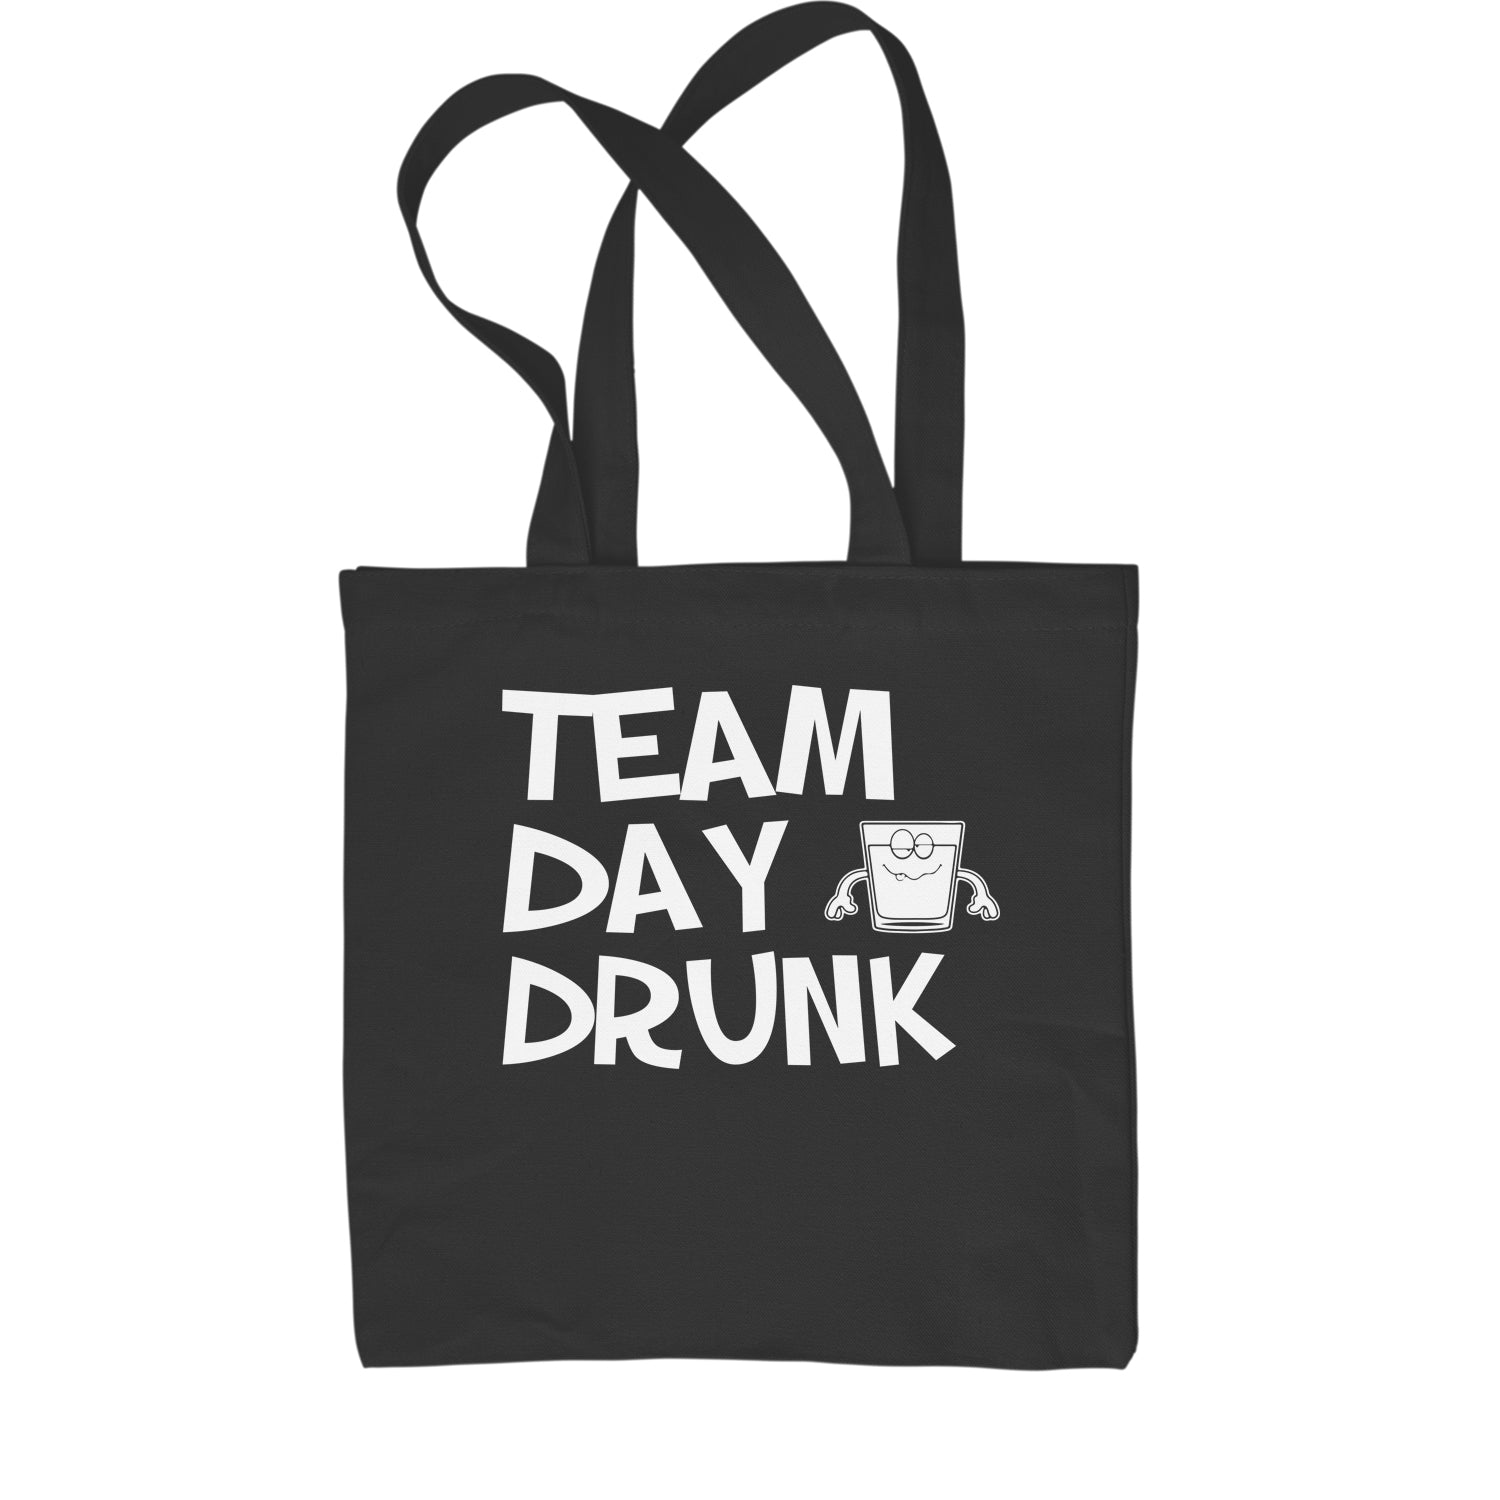 Team Day Drunk Shopping Tote Bag beer, day, drinking, fun, funday, shots, Sunday, tatsing, wine by Expression Tees